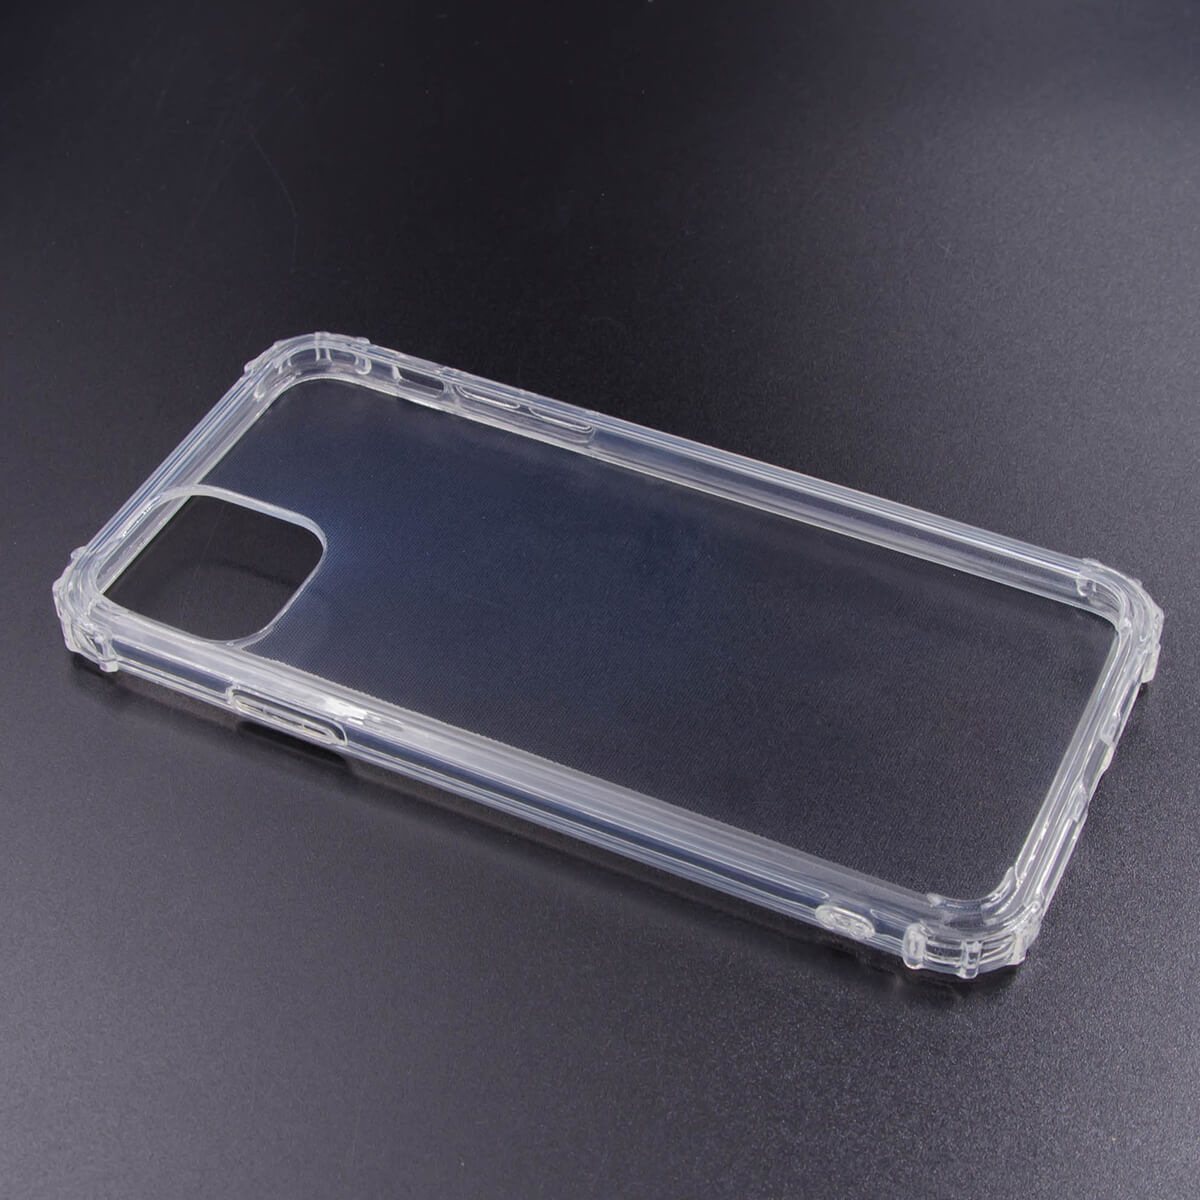 Tpu clear strong for iphone 11 pro max (6.5")